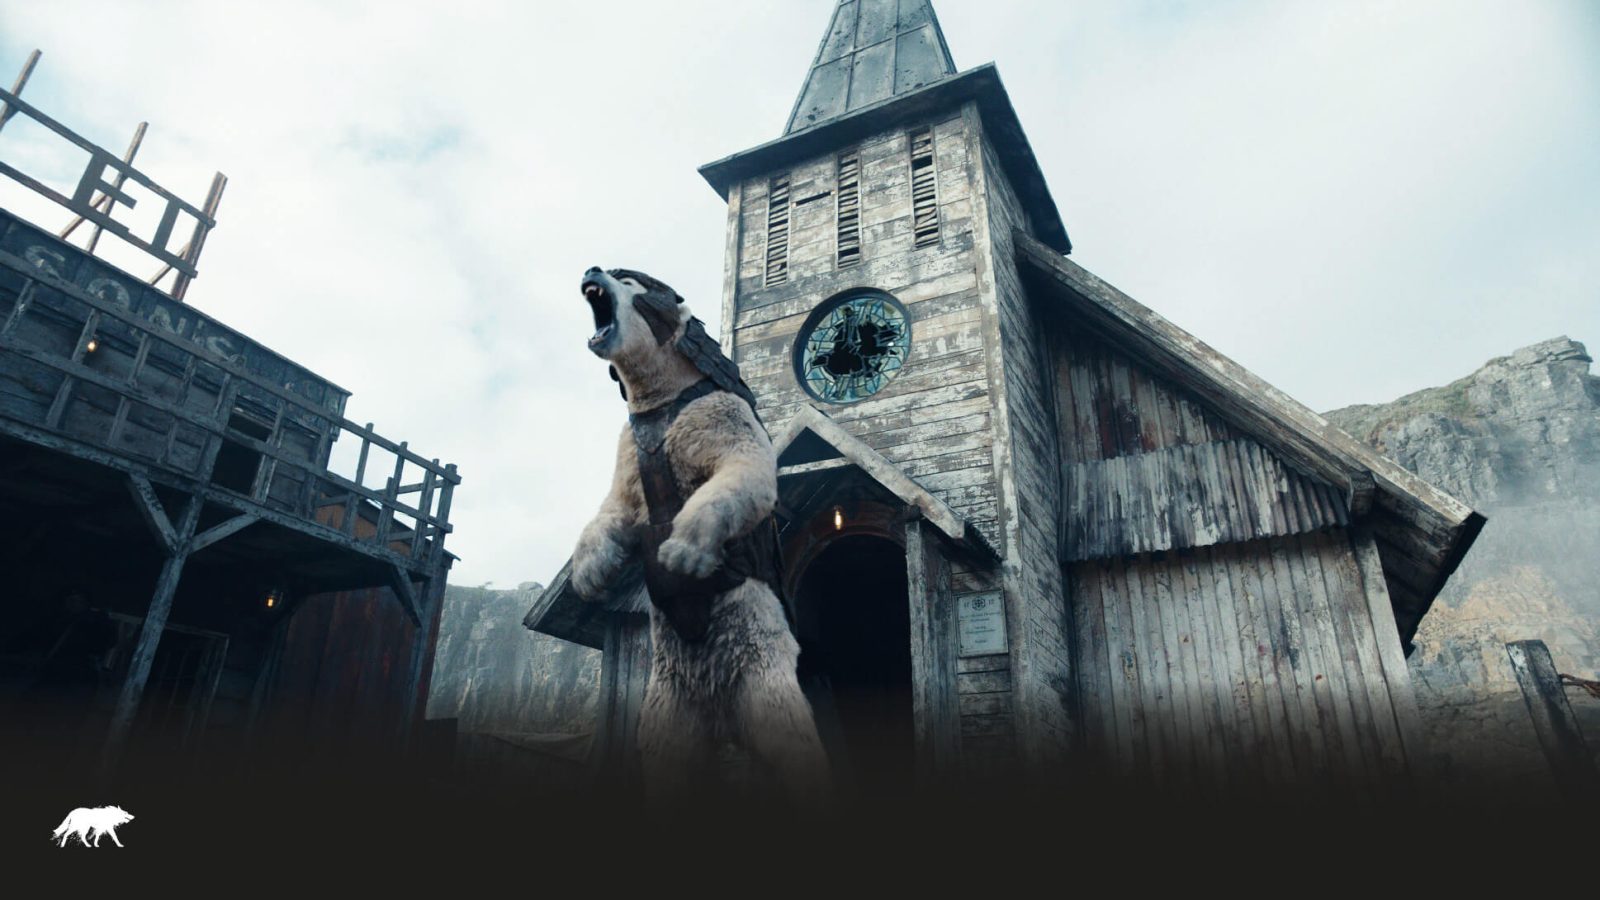 A large, animated polar bear stands on its hind legs, roaring in front of a rustic wooden building with a clock tower, set in a misty, mountainous landscape designed by a top web design